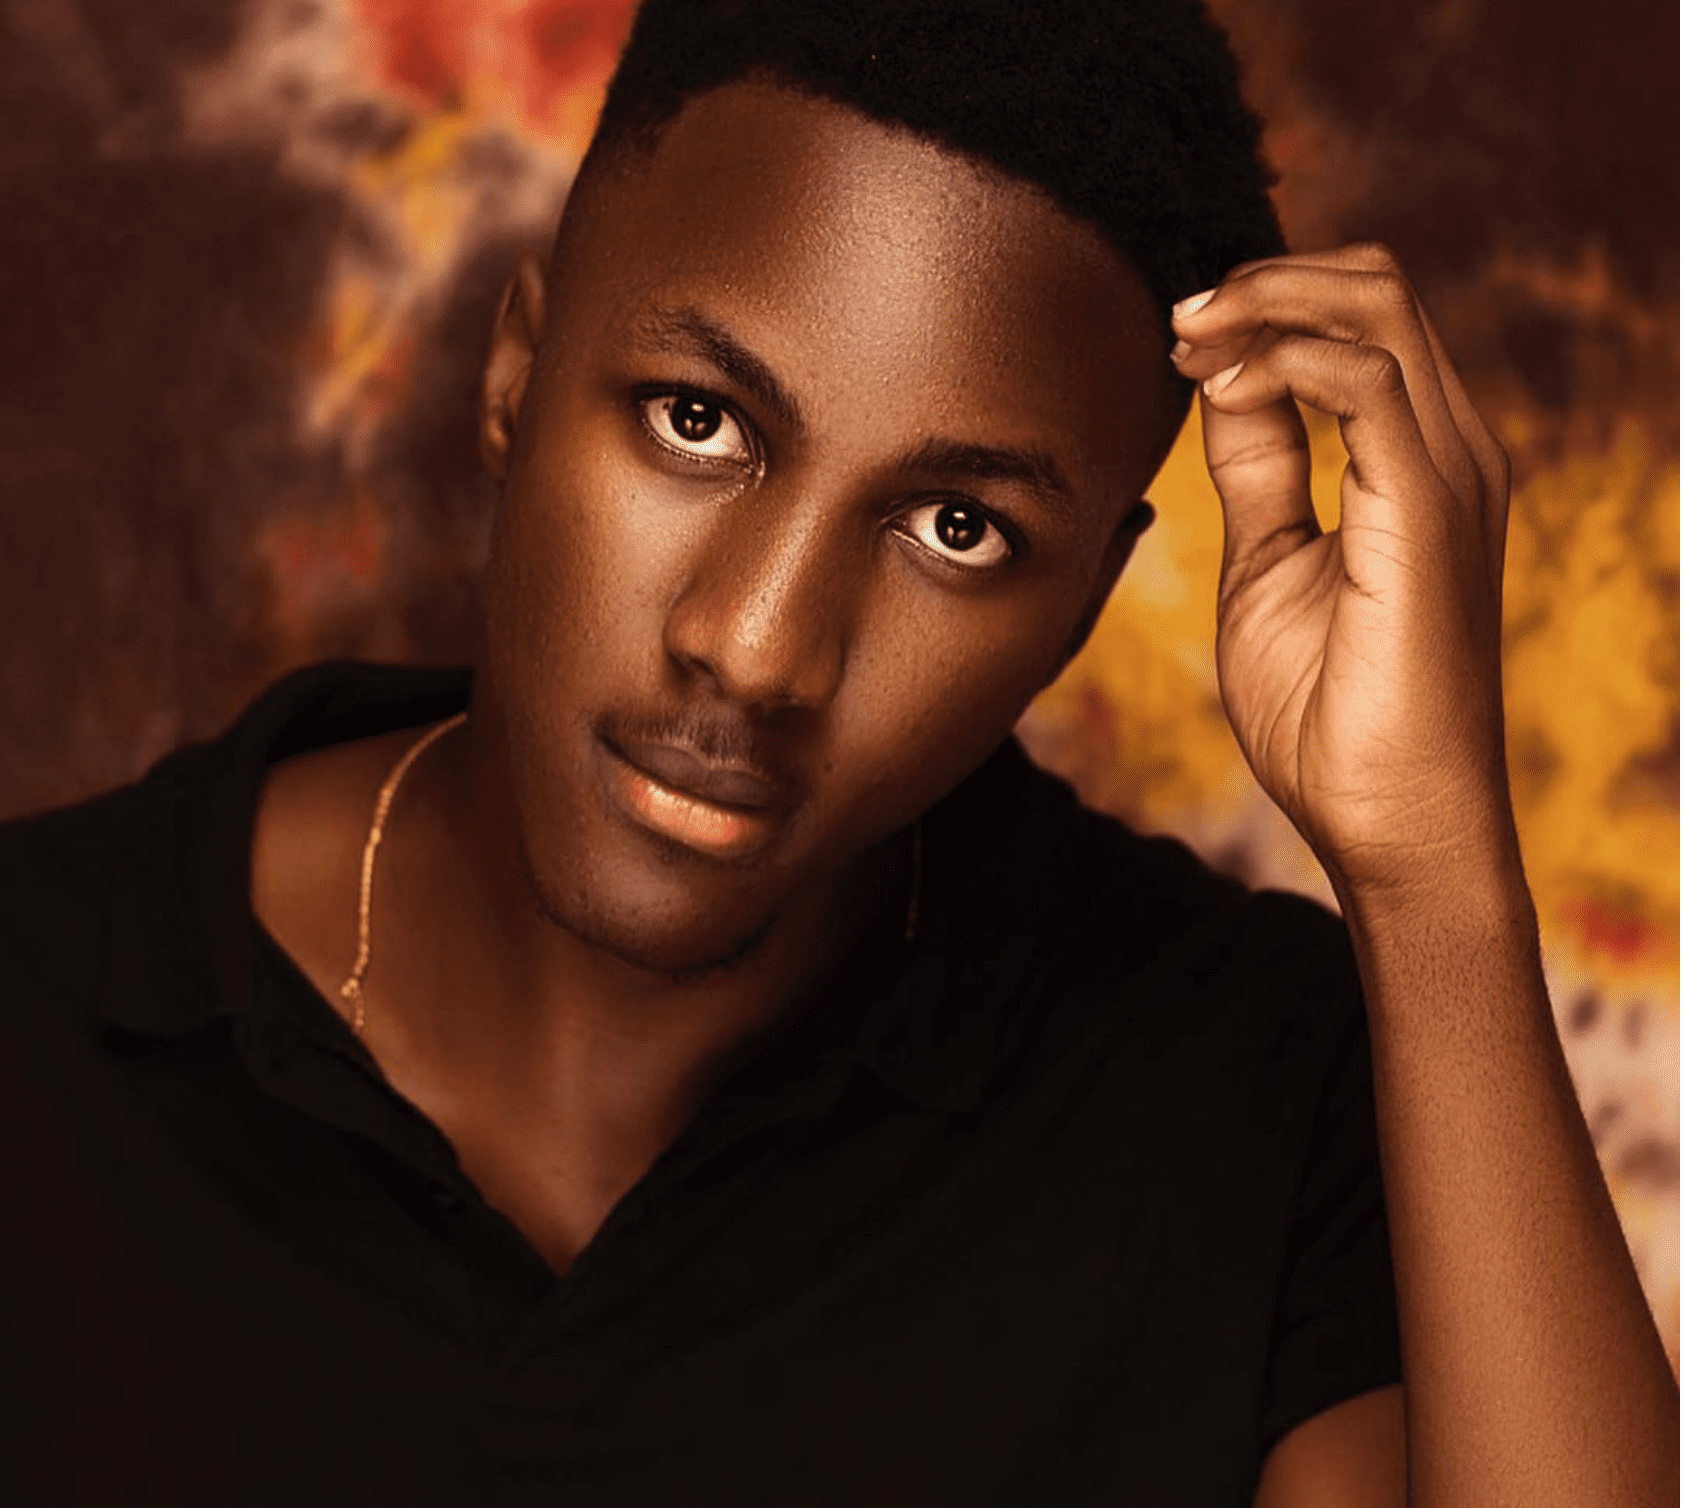 Listen “Proud”, off Foresythe’s ‘Lolu Foresythe and Partners’ project